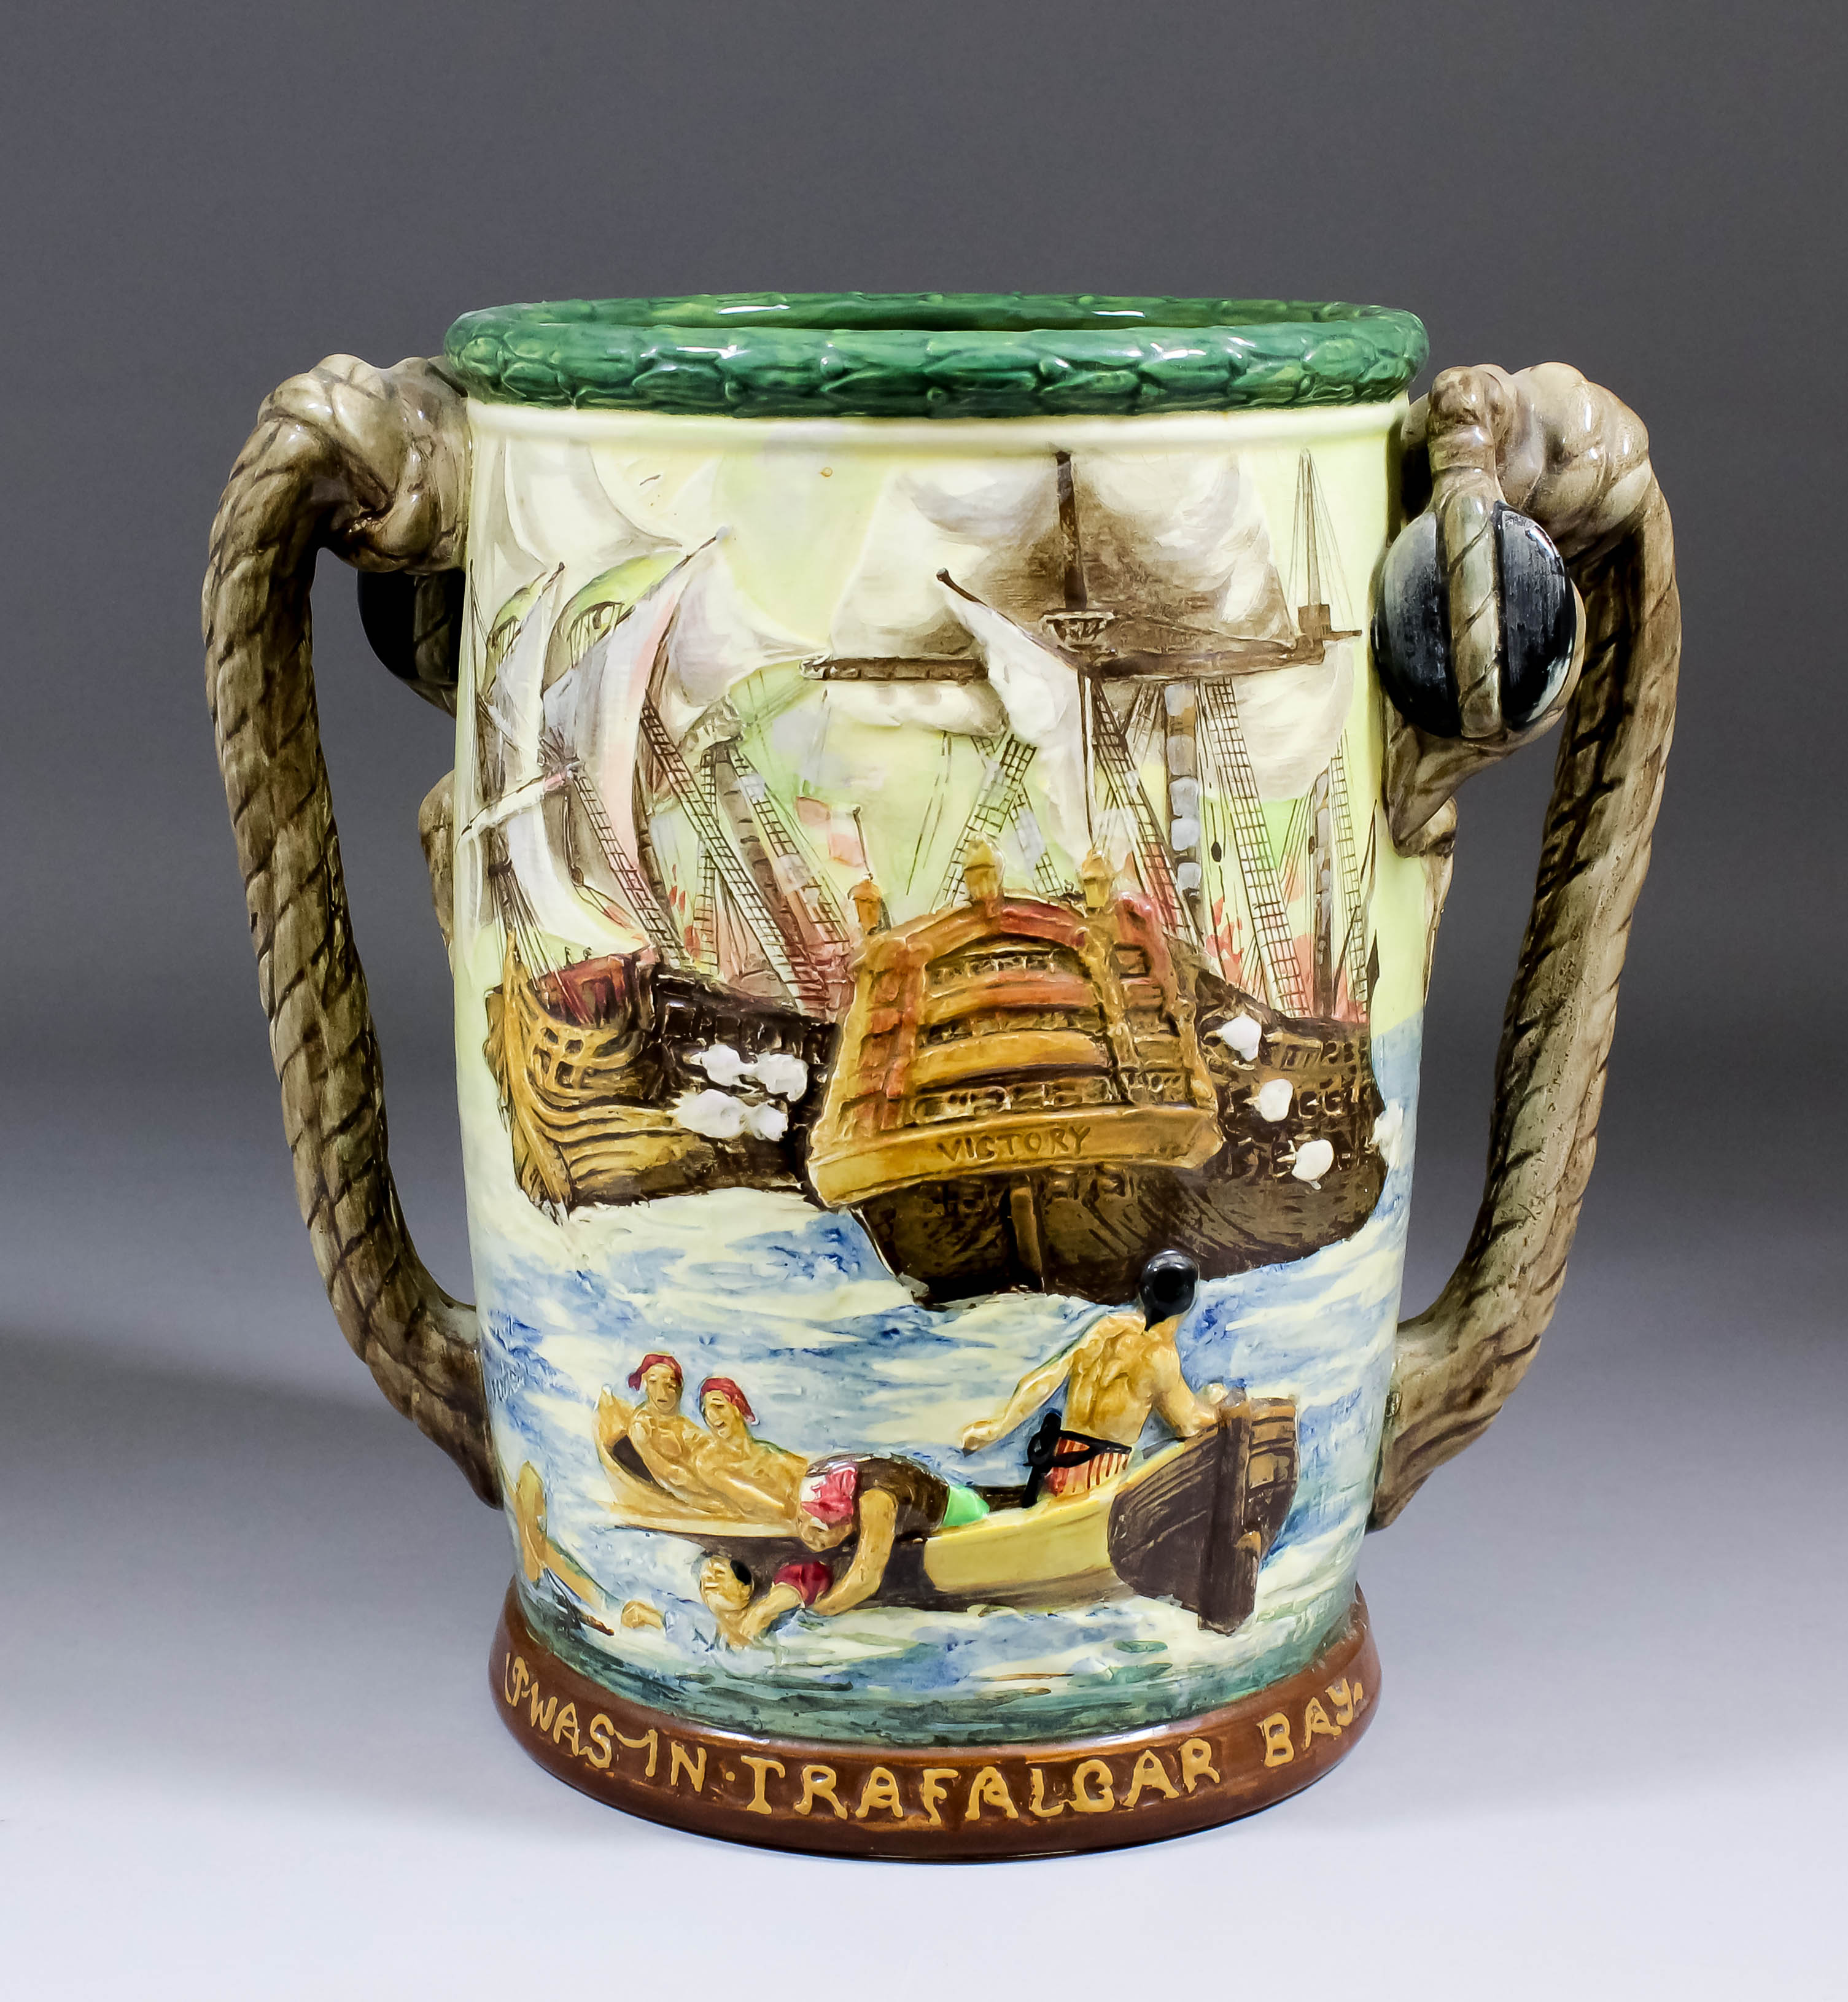 A Royal Doulton pottery "The Lord Nelson" two-handled loving cup designed by Charles Noke and - Image 2 of 3